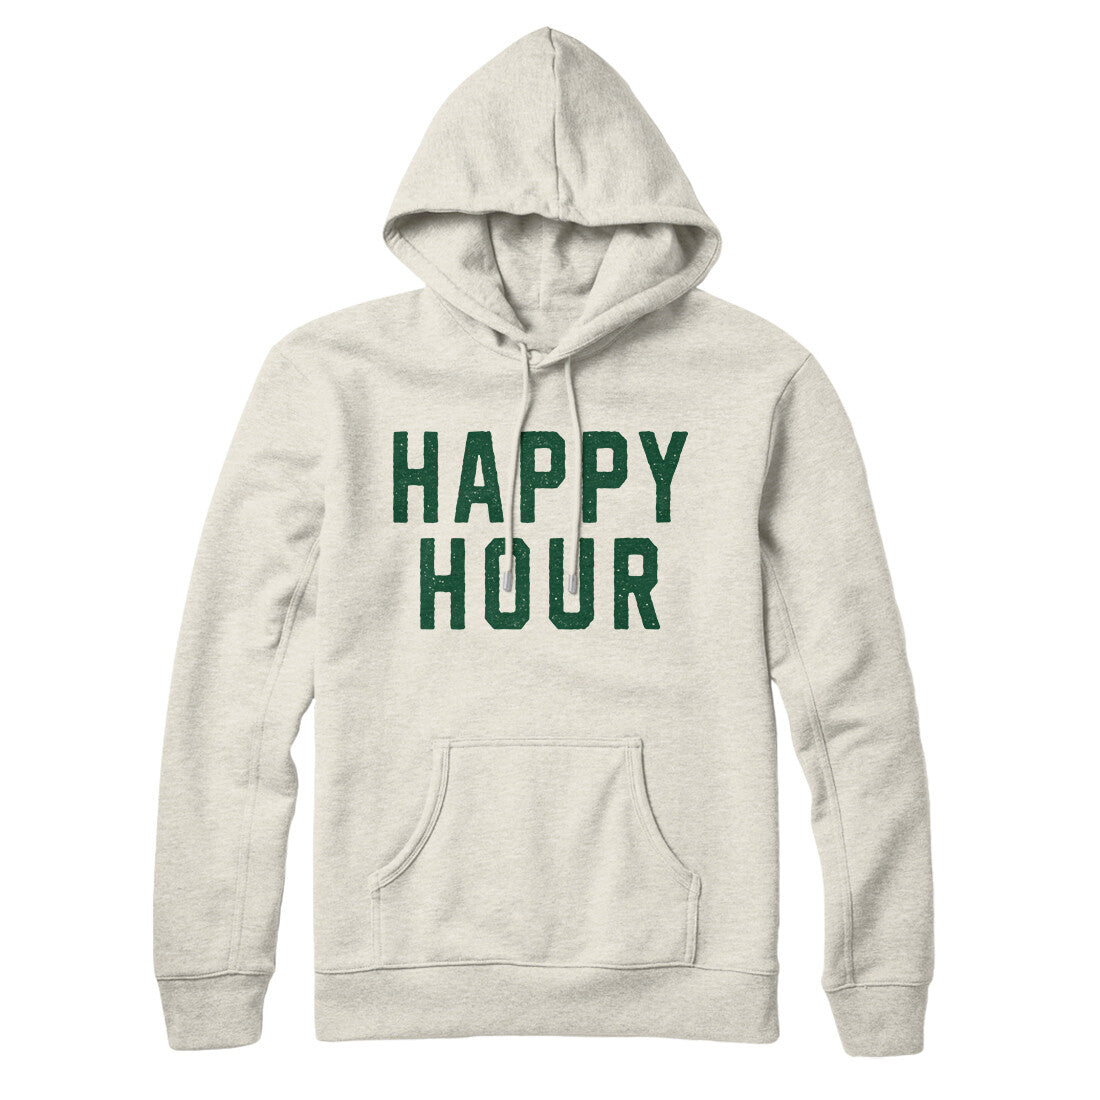 Happy Hour in Heather Oatmeal Color